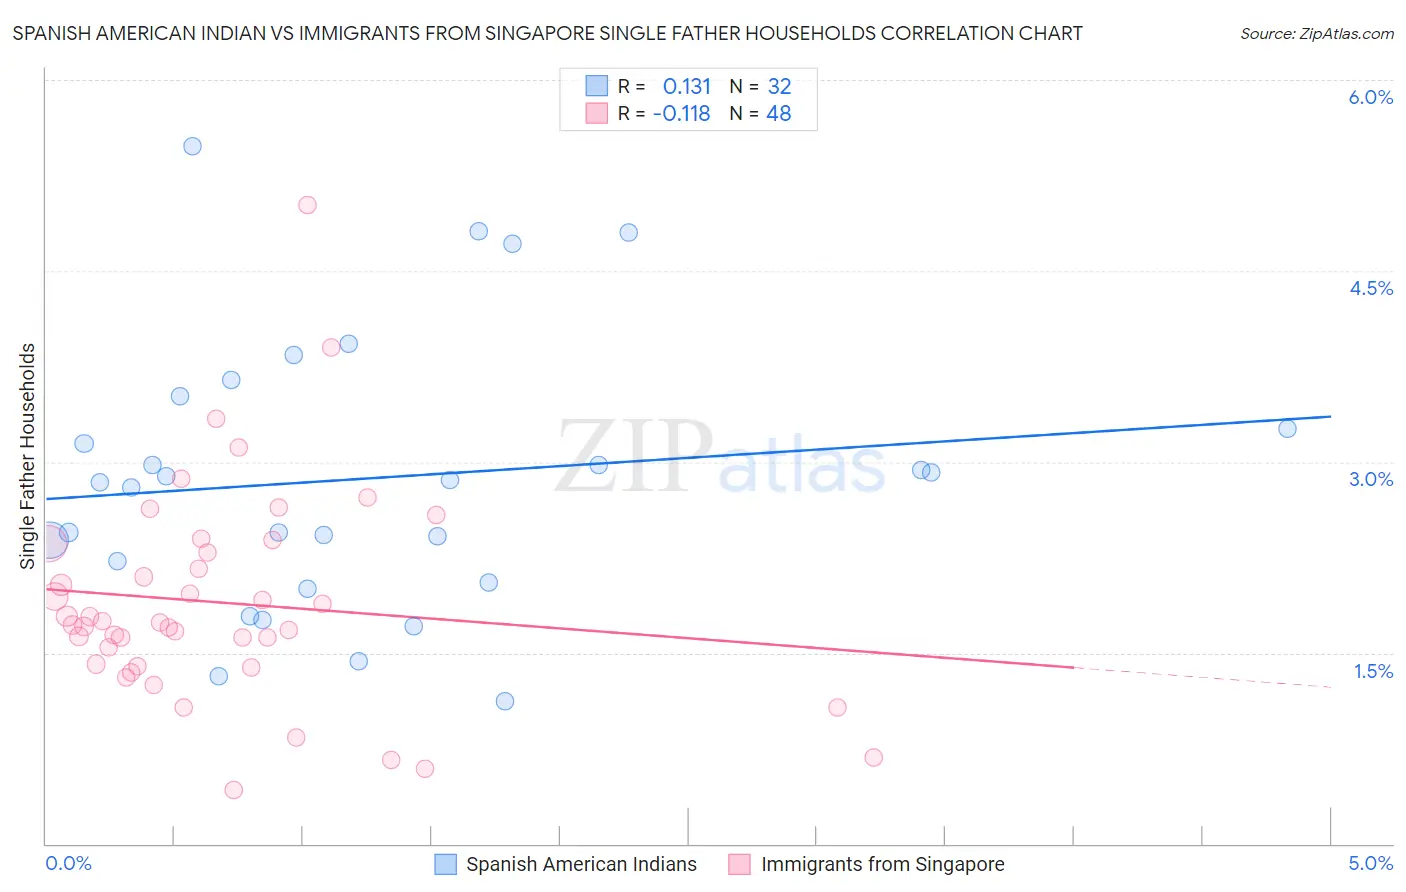 Spanish American Indian vs Immigrants from Singapore Single Father Households